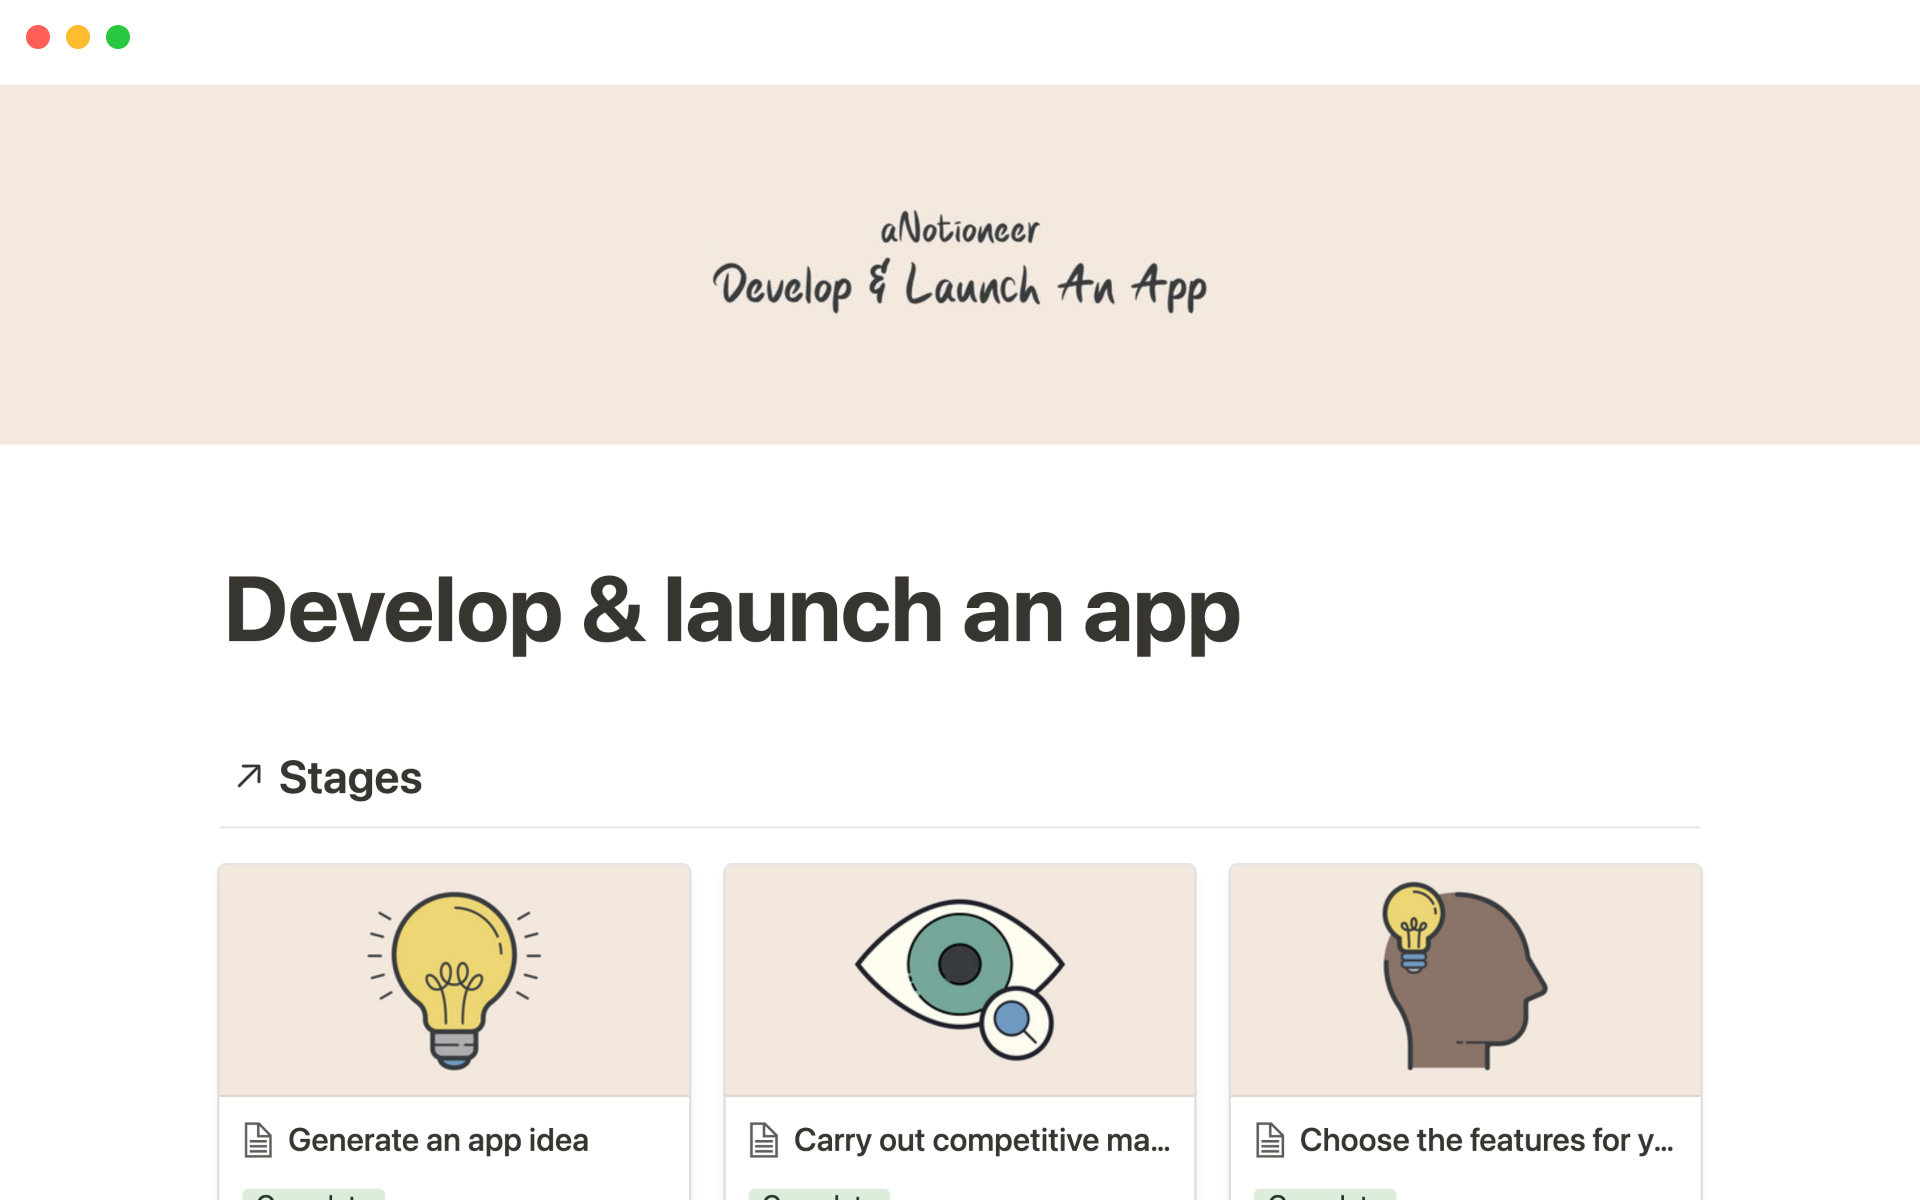 The desktop image for the Develop & launch an app template